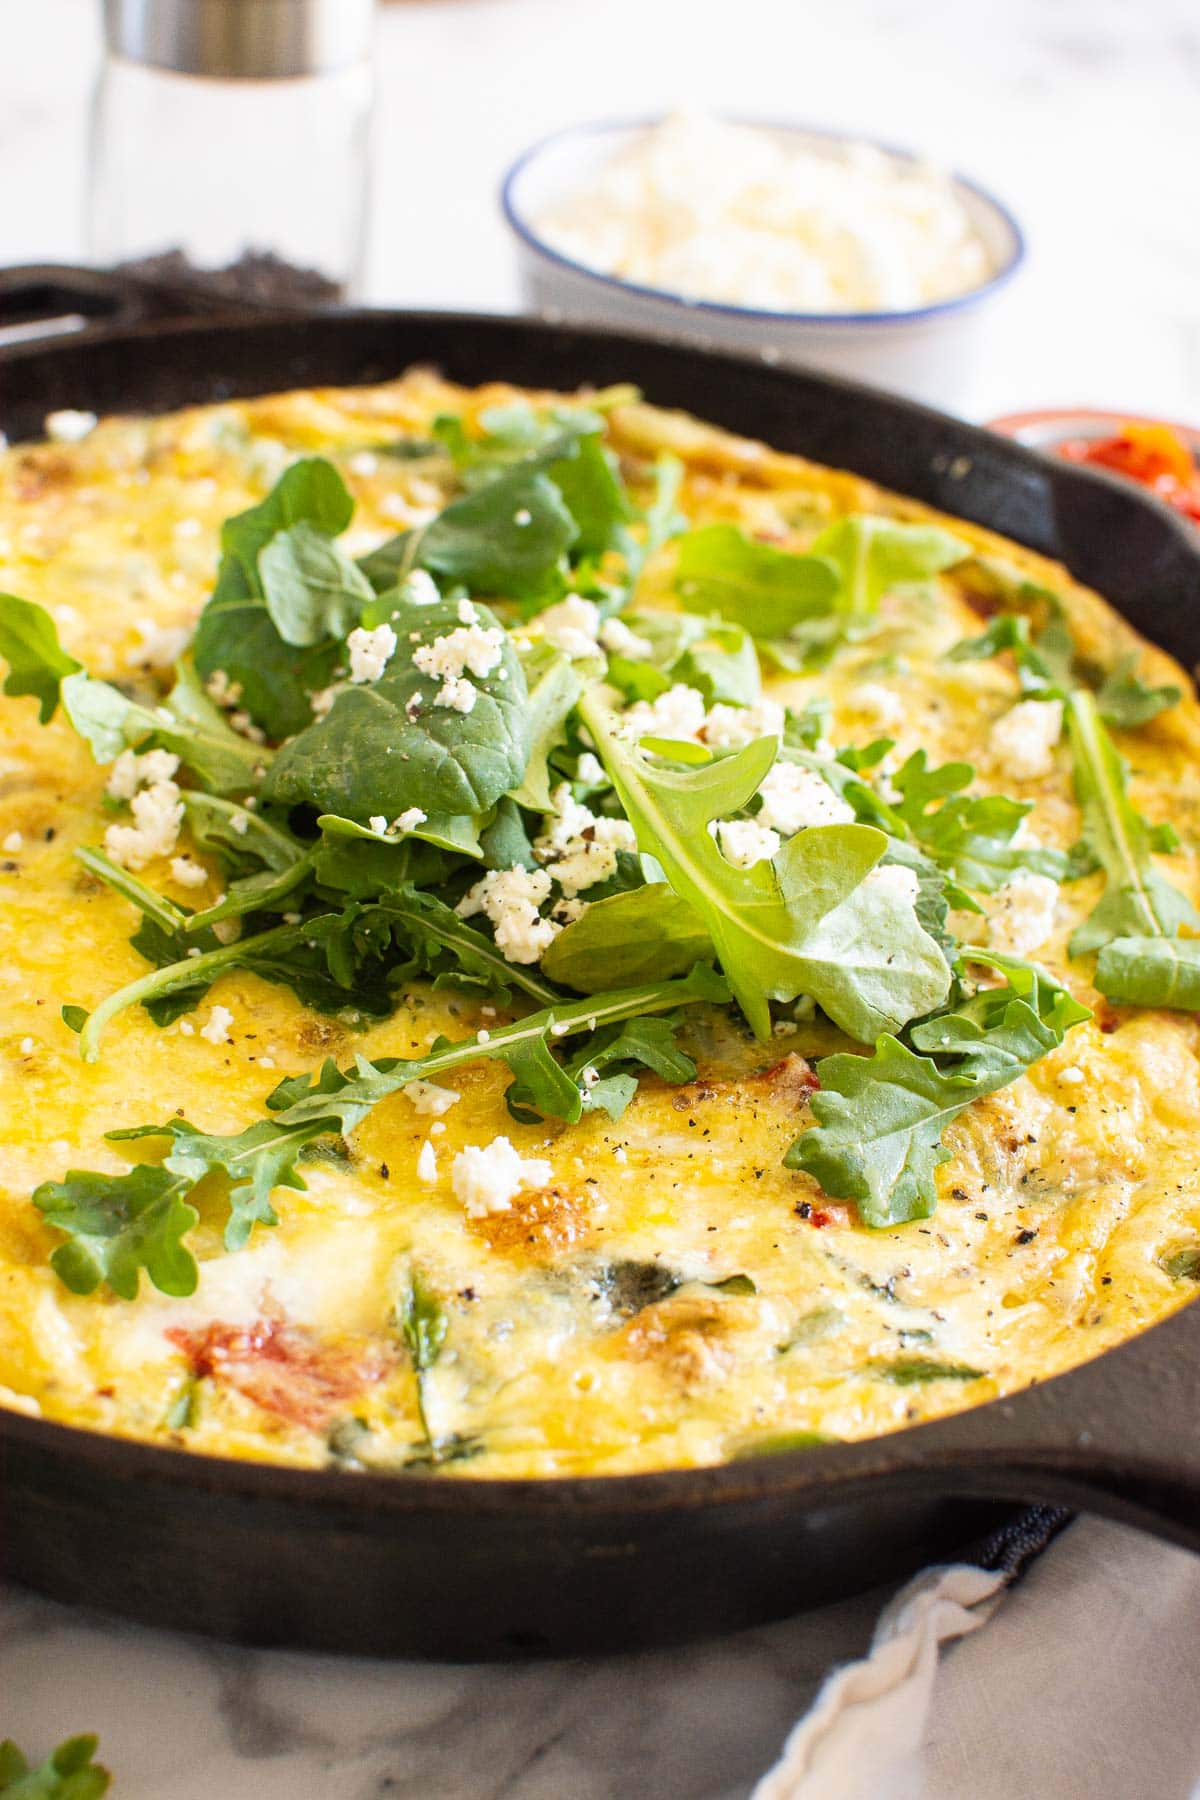 Vegetable frittata in skillet with feta and greens on top.